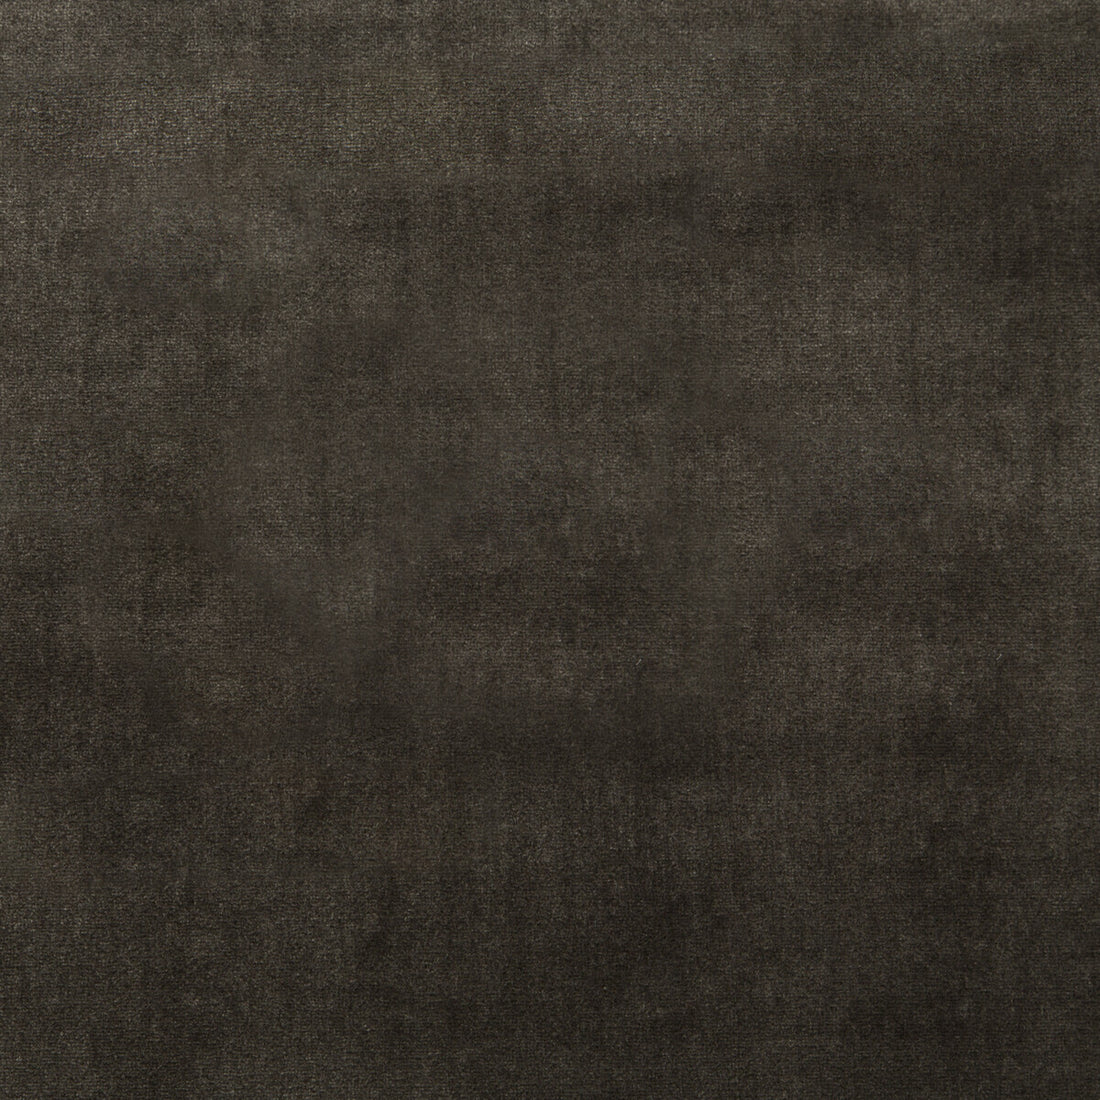 Duchess Velvet fabric in charcoal color - pattern 34641.86.0 - by Kravet Couture